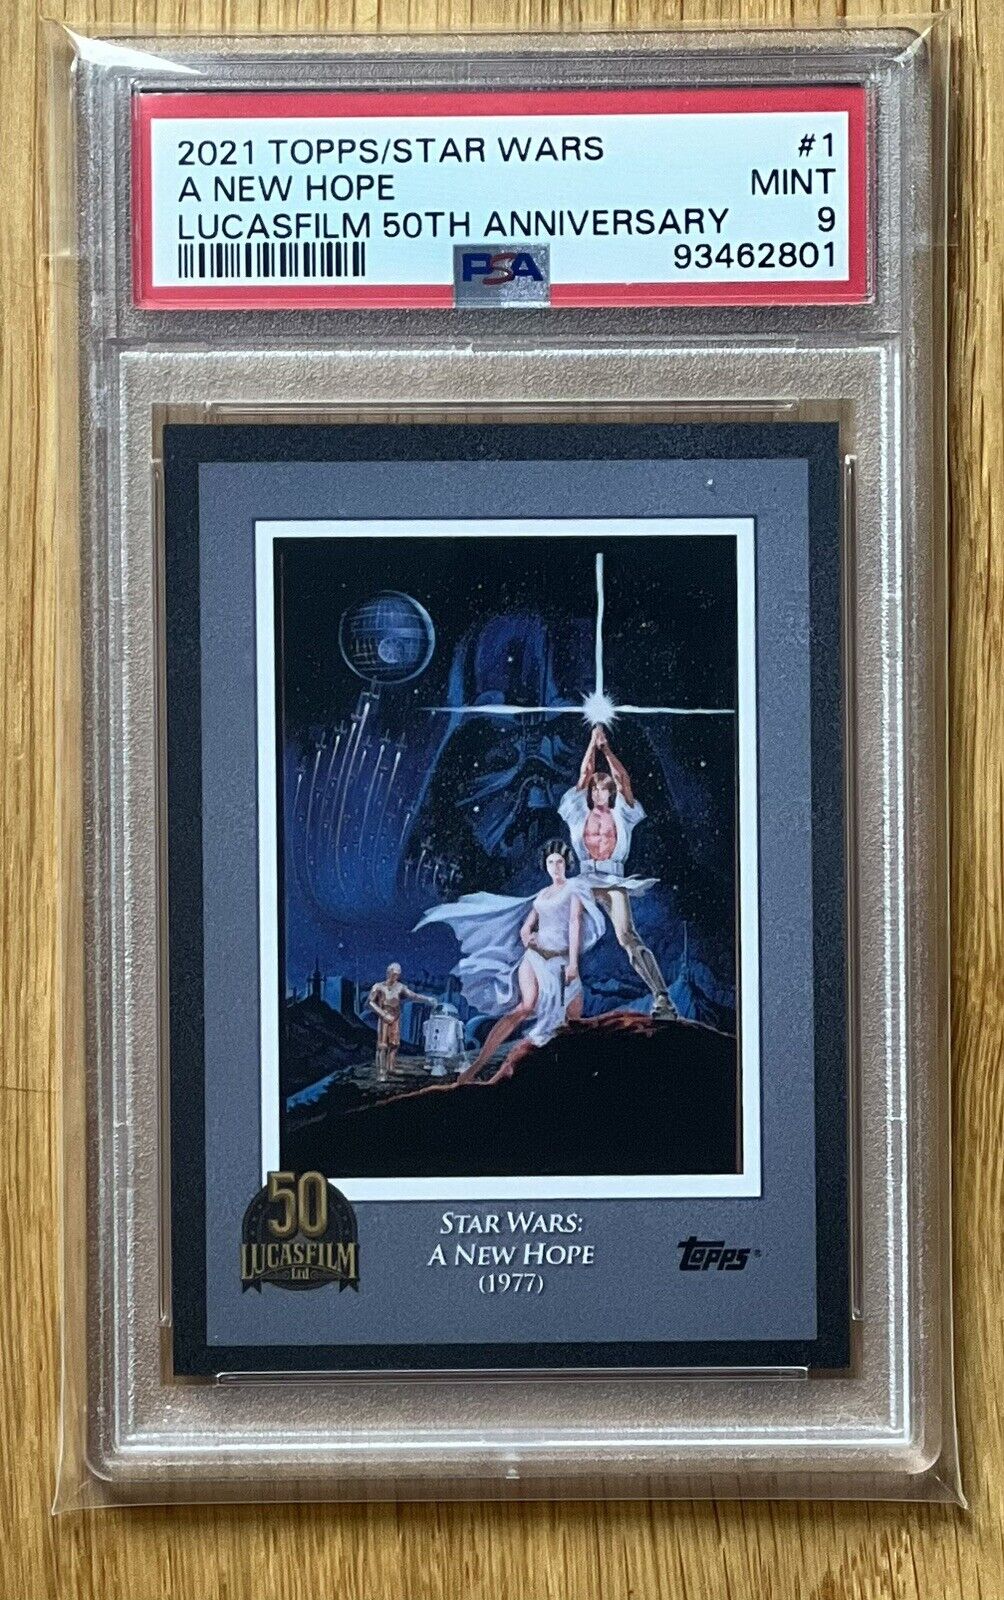 Star Wars 2021 TOPPS #1 A New Hope Lucasfilm 50th Anniversary Poster Card PSA 9